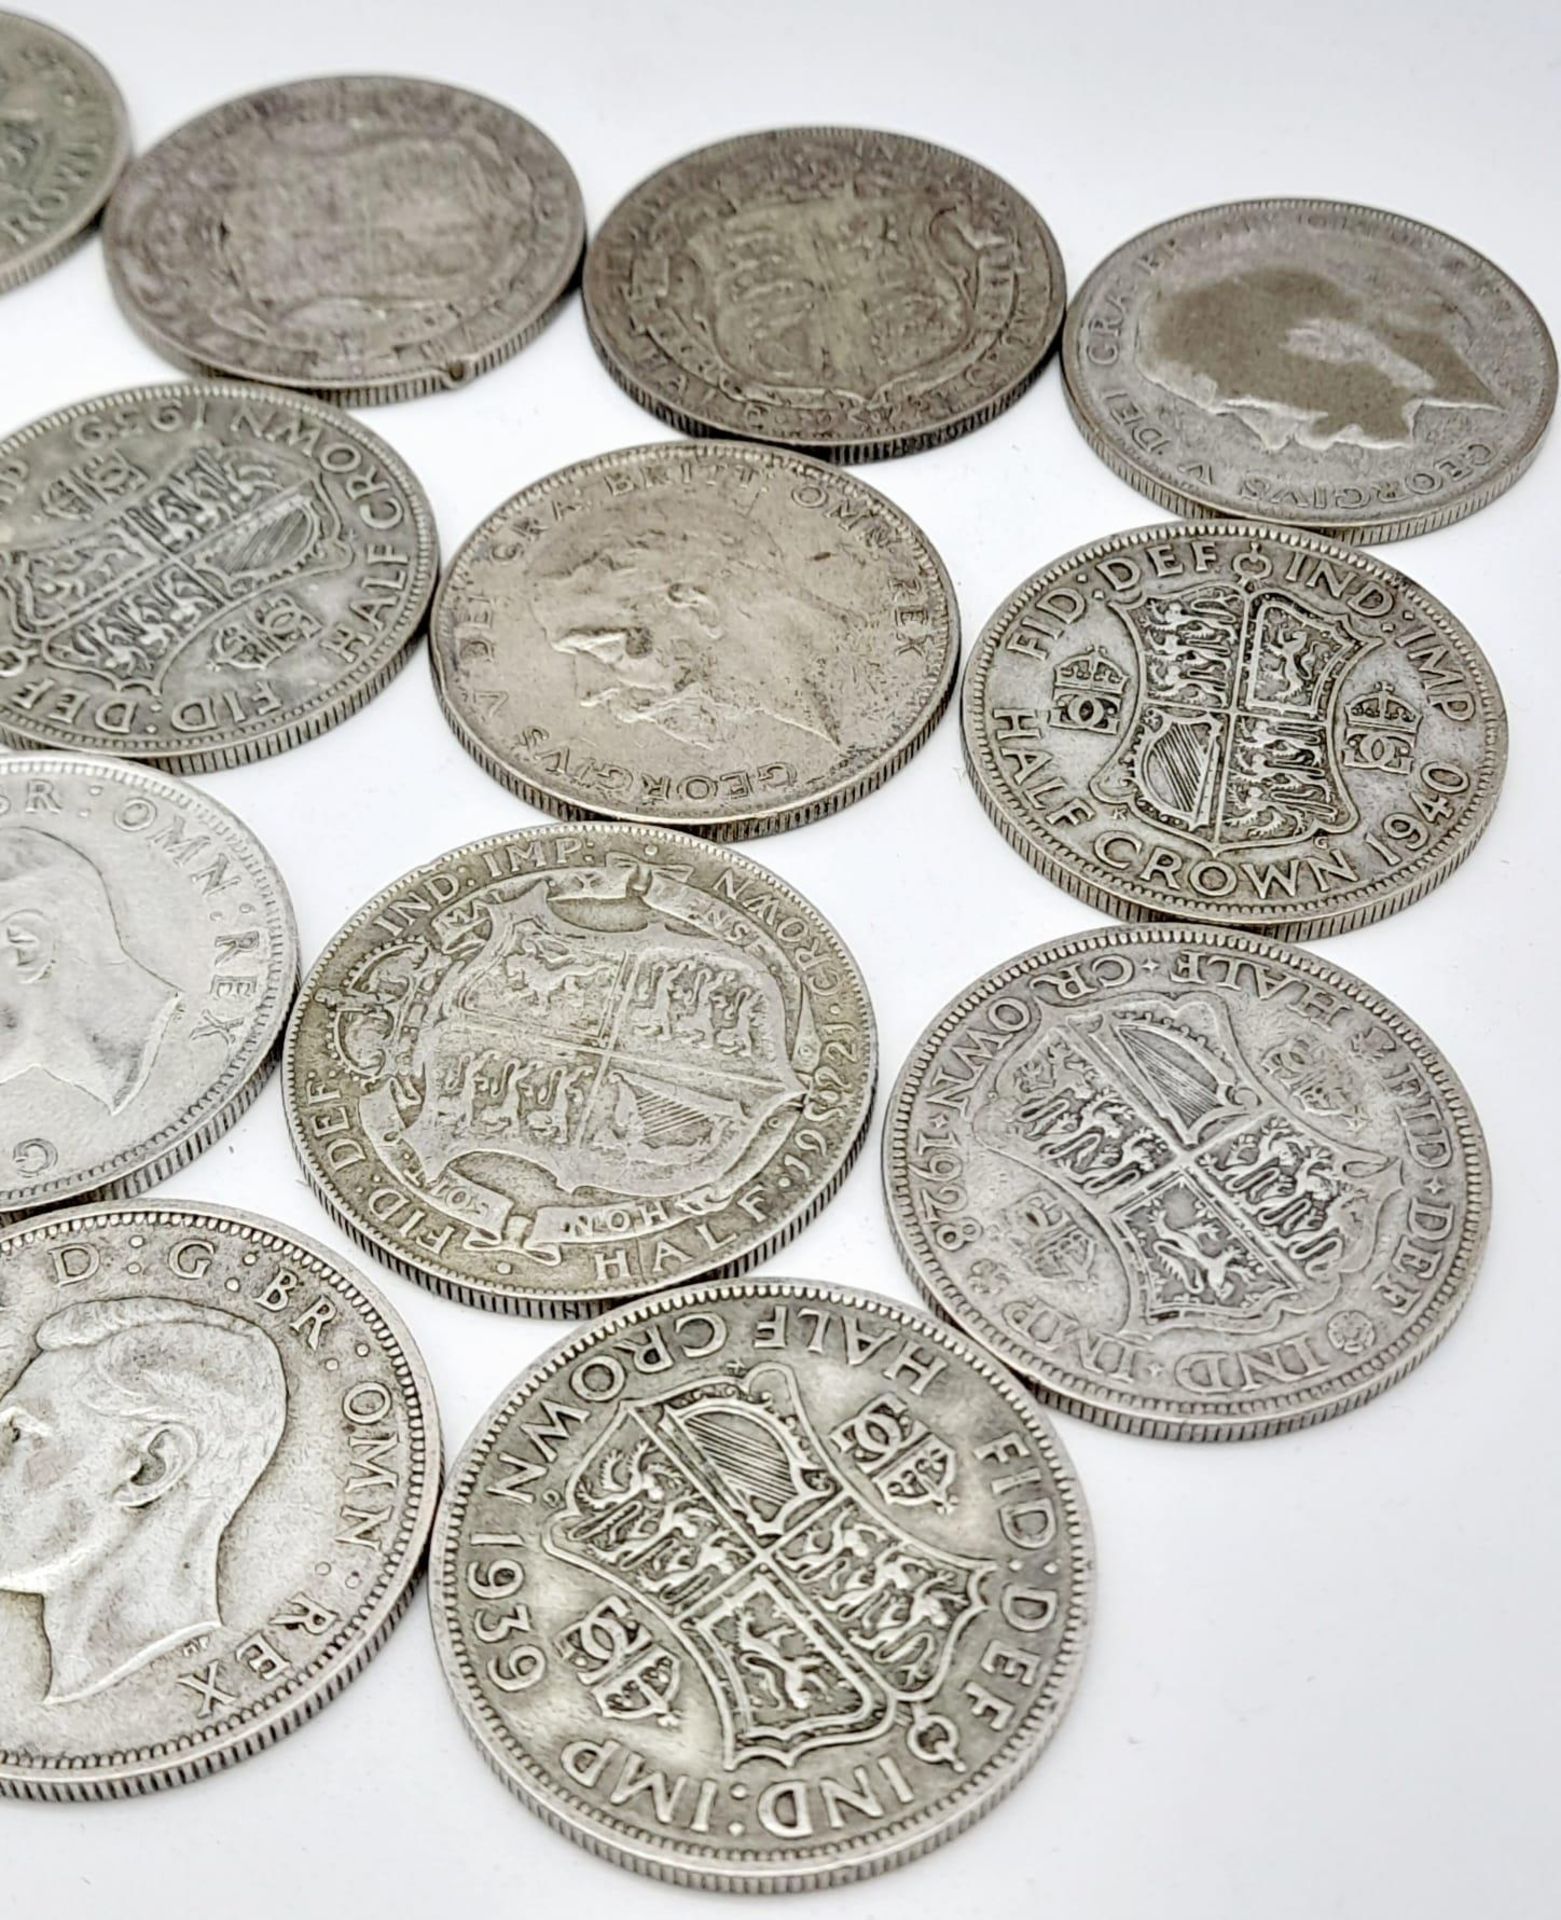 19 Pre 1947 British Silver Half Crown Coins. 265g total weight. - Image 4 of 5